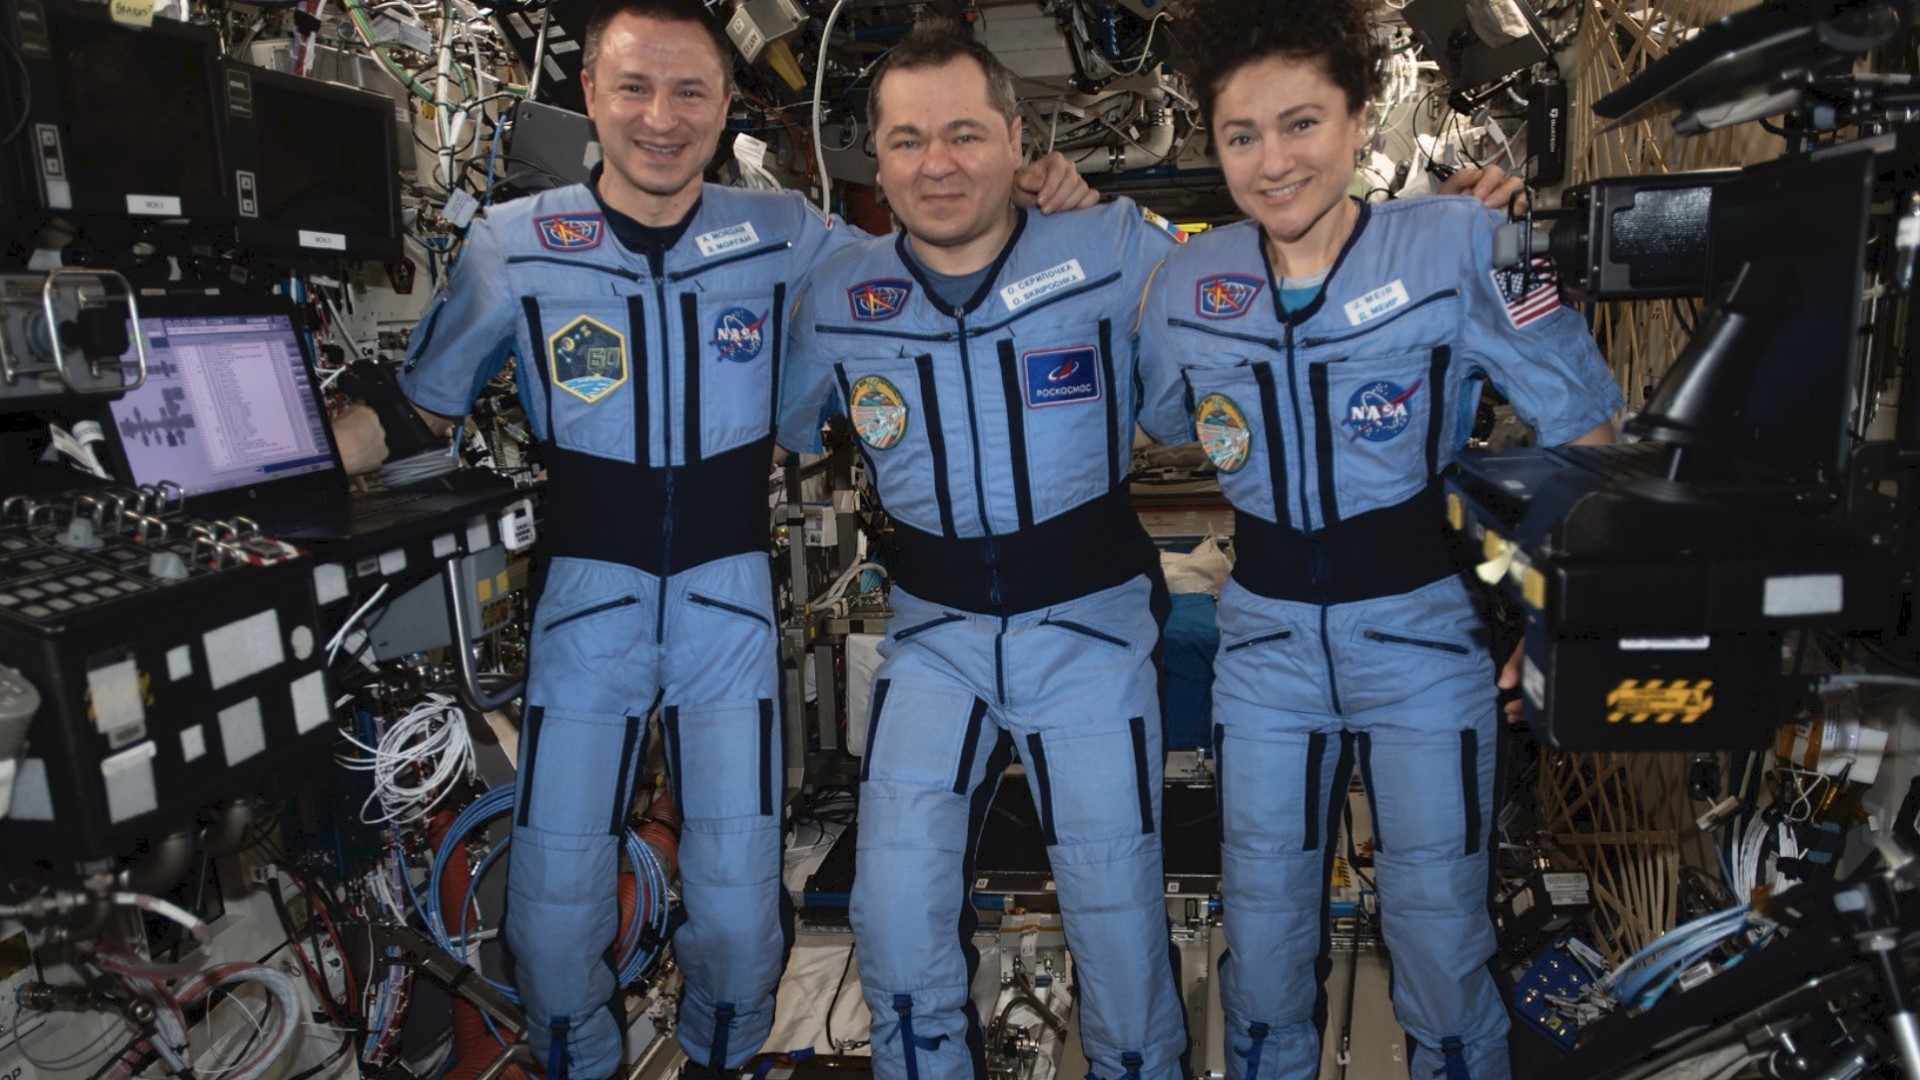 While space might be the safest place to be right now amid the COVID-19 pandemic, a three-member crew from the International Space Station has just safely touched down on Earth.